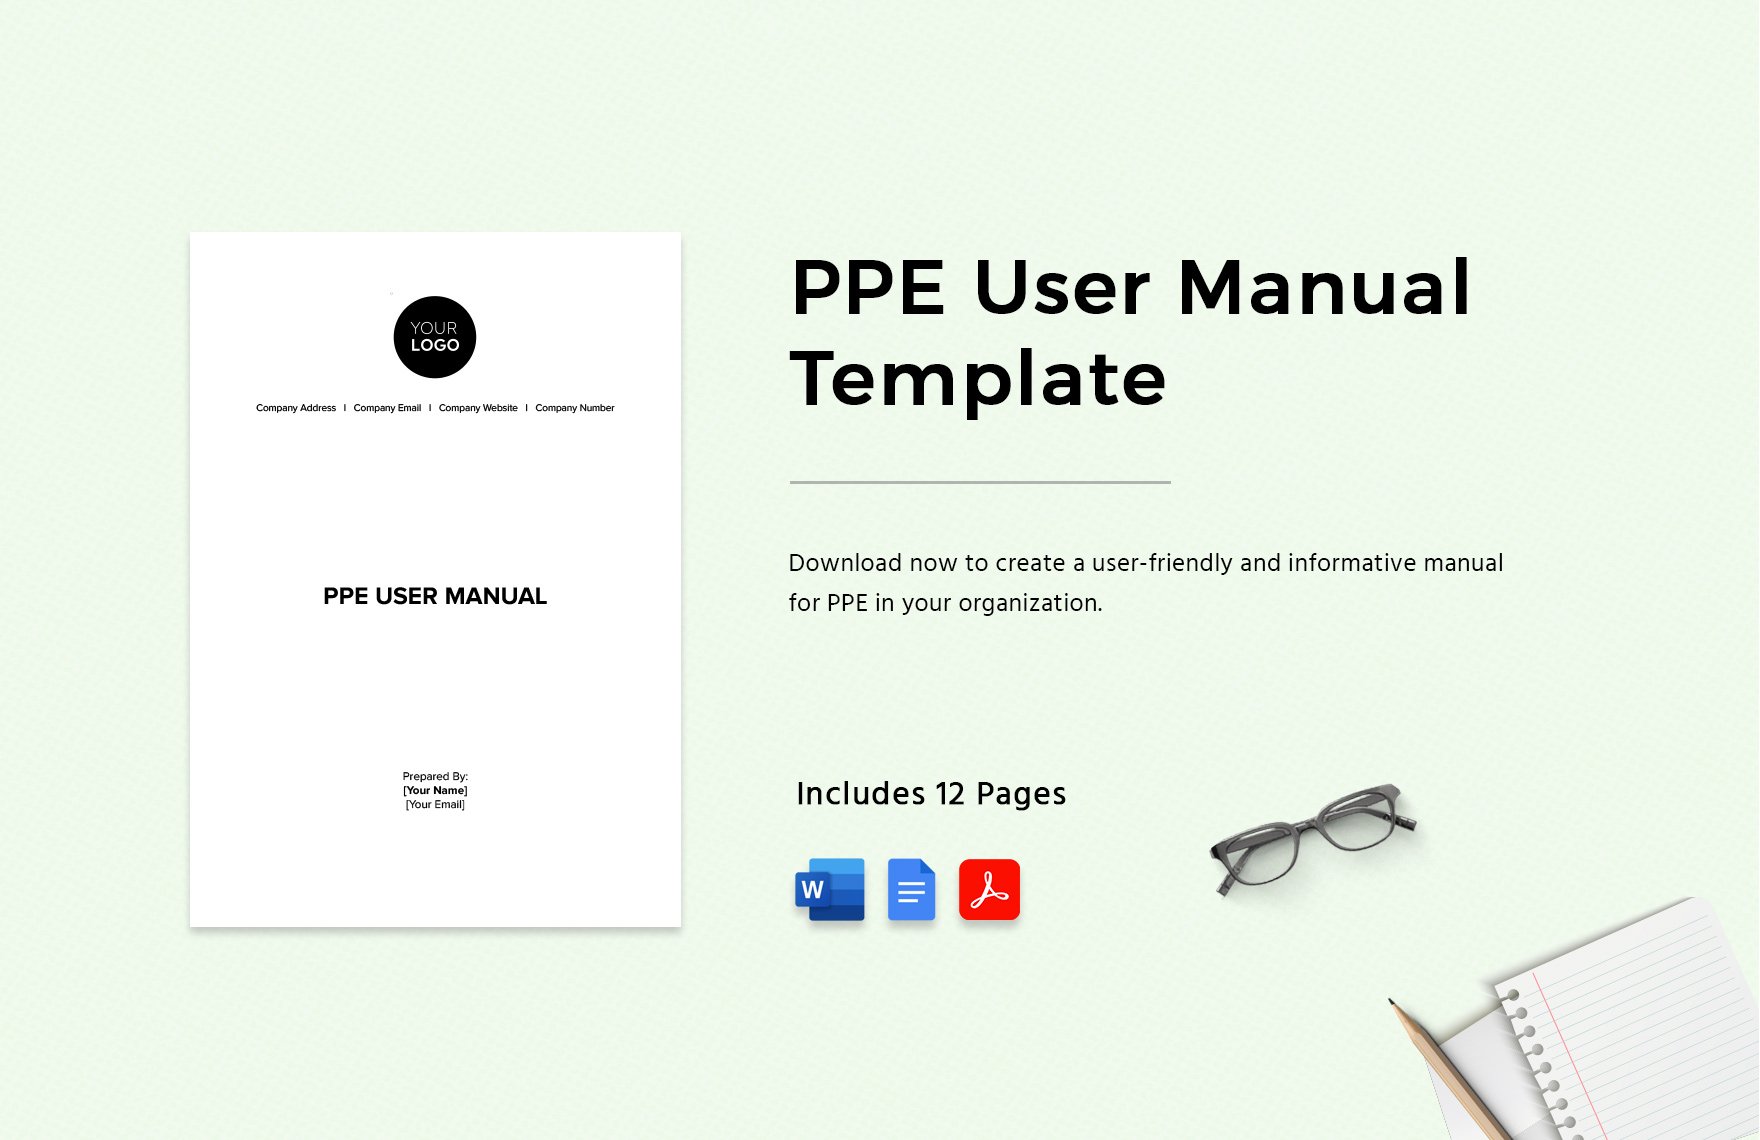 PPE User Manual Template